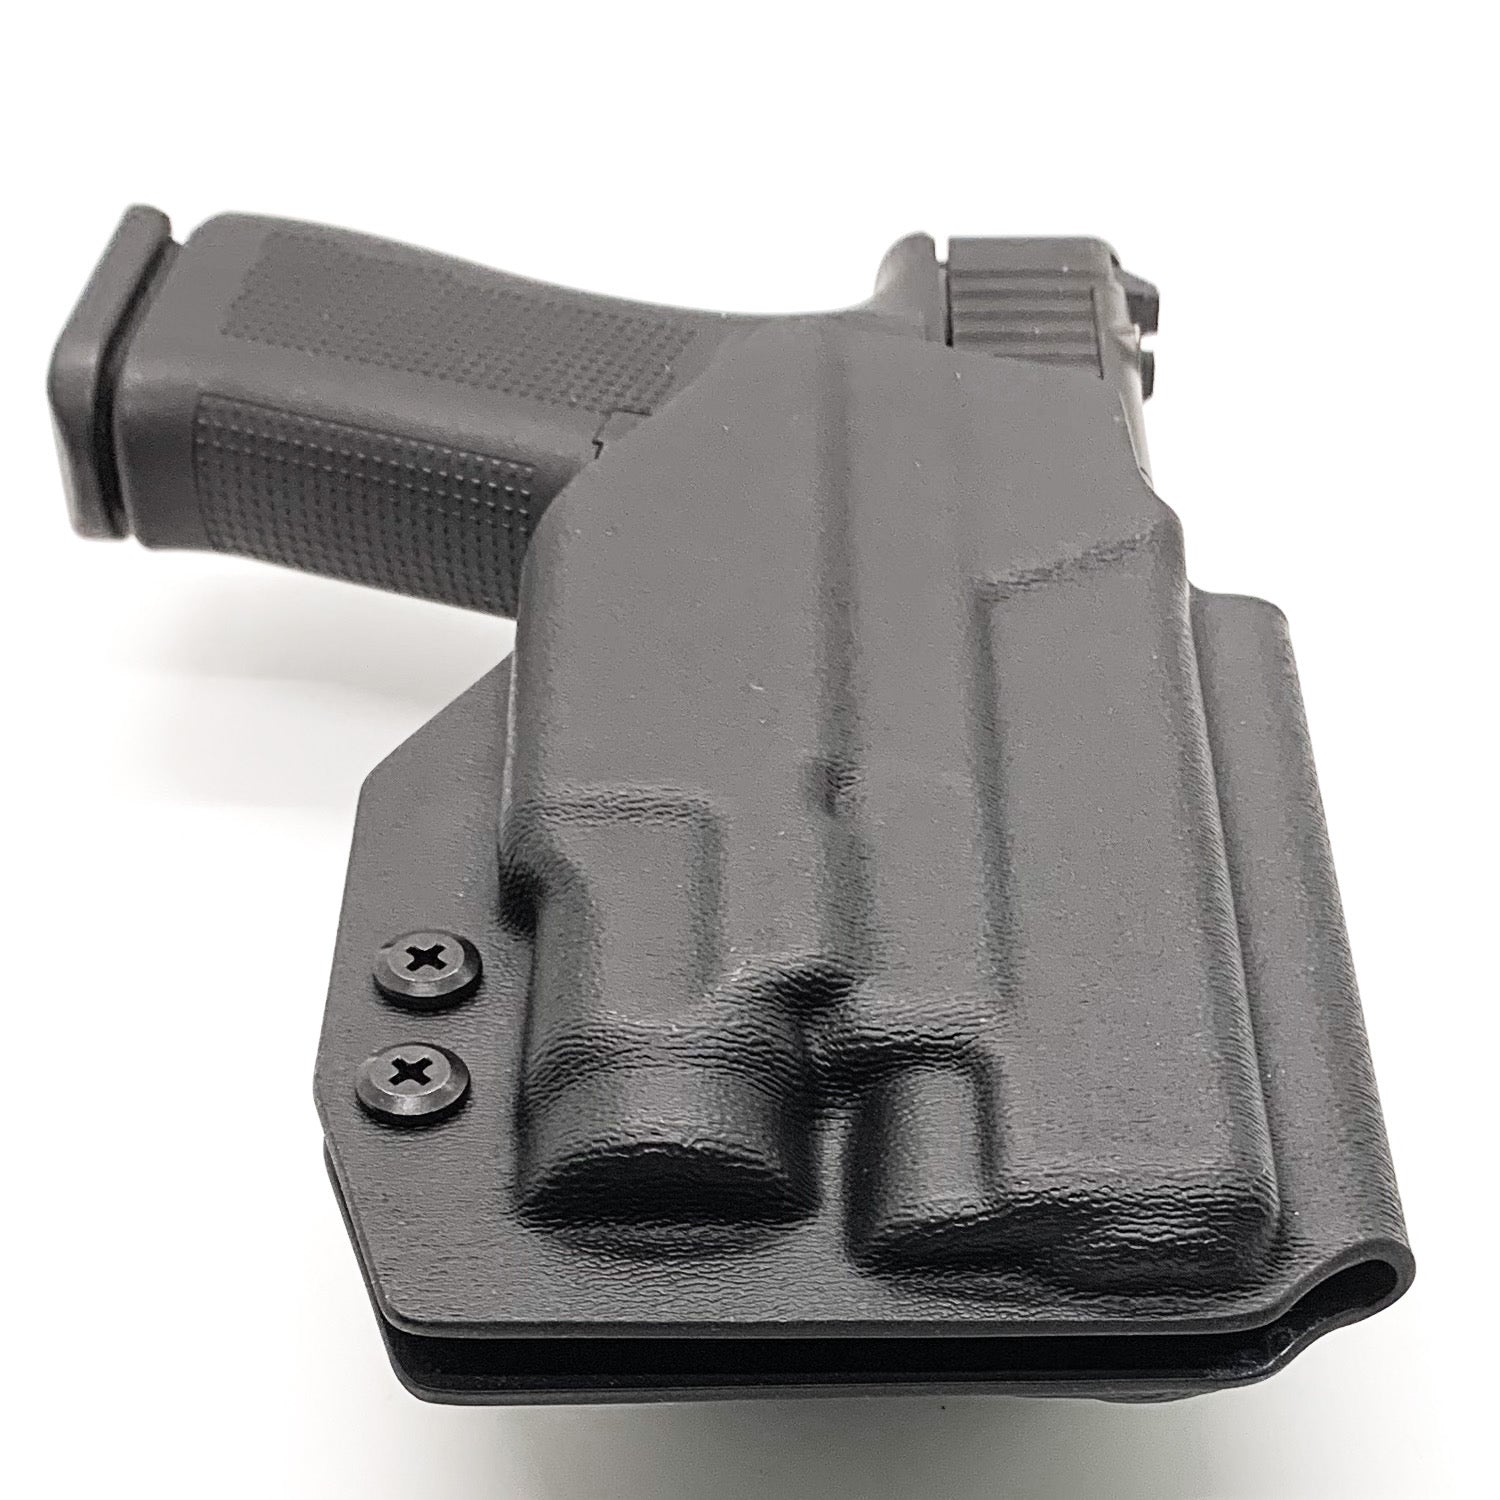 Outside Waistband Holster designed to fit the Glock 43X MOS, 48 MOS, 43X Rail, and 48 Rail pistols with the Streamlight TLR-7 Sub light mounted to the handgun. Full sweat guard, adjustable retention, minimal material and smooth edges to reduce printing. Made in the USA.  43 X 48 X 